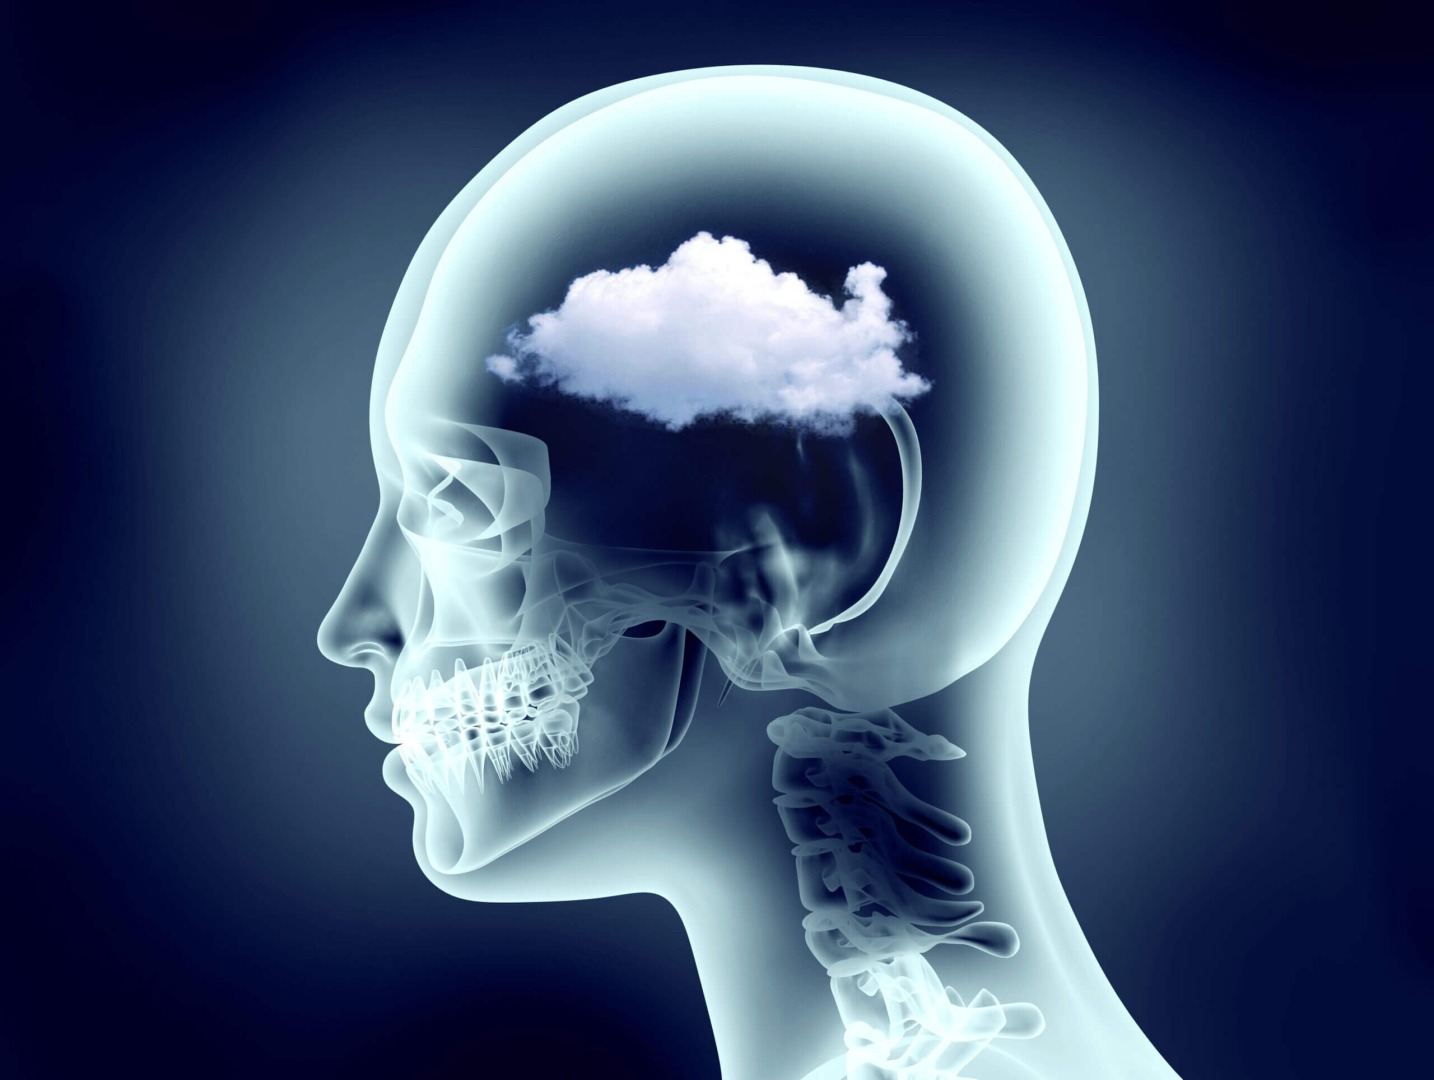 Experiencing Brain Fog? Here’s How to Increase Concentration